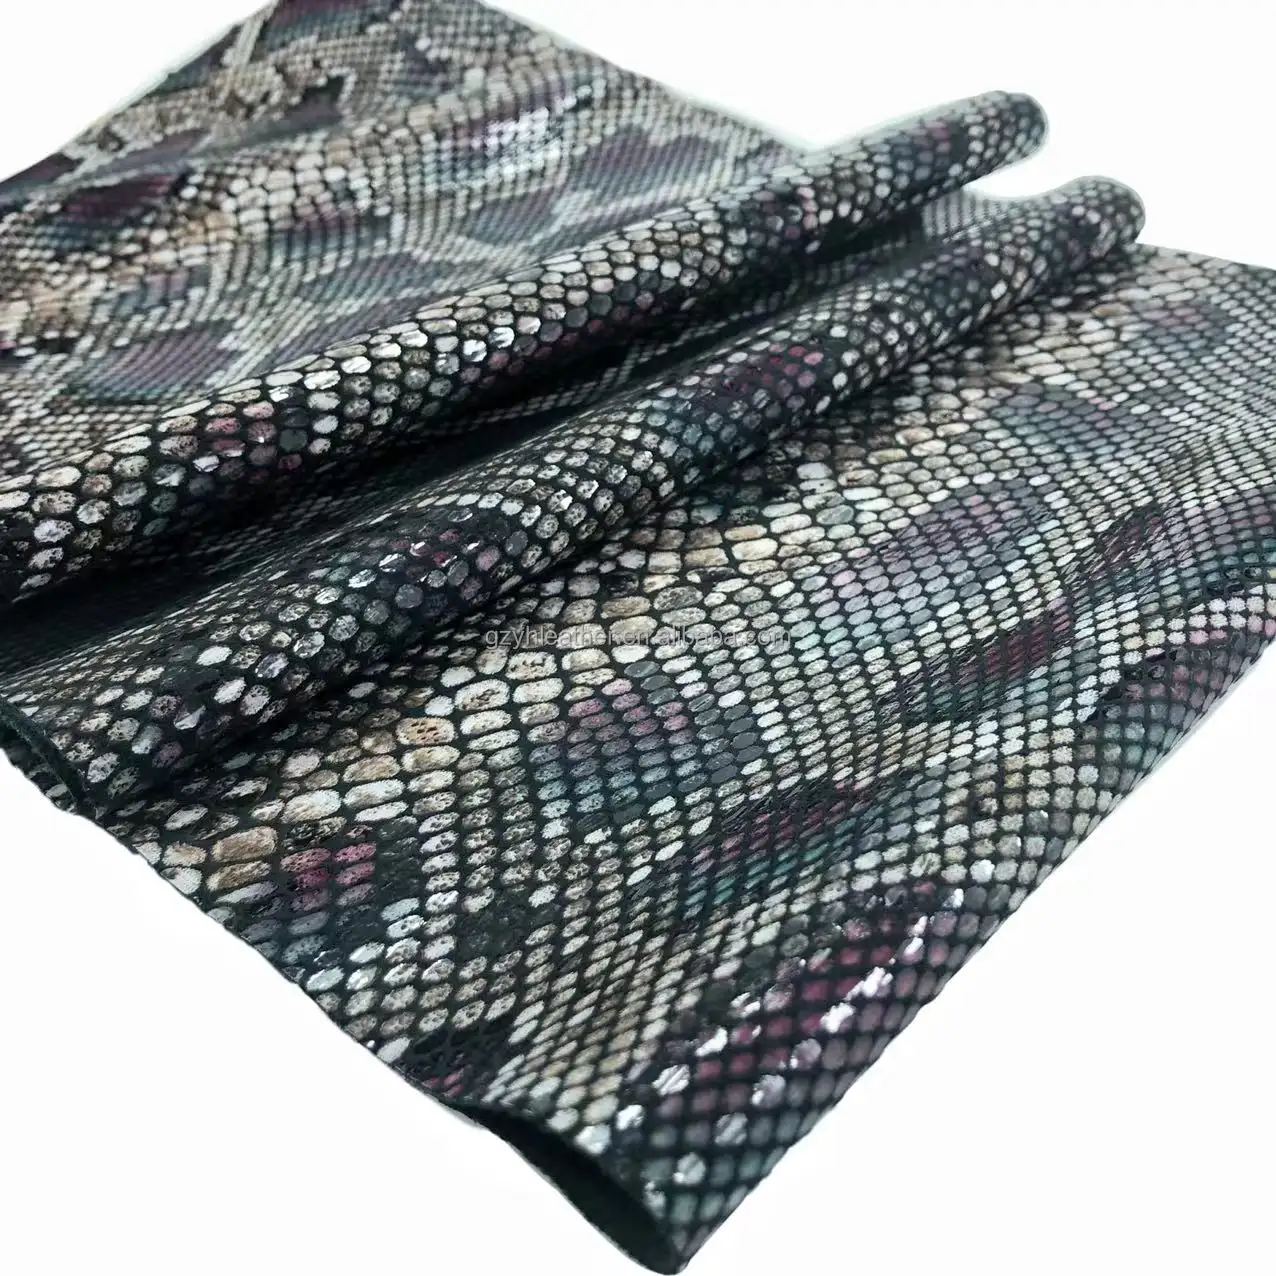 FA-970 animal snake scale pattern transfer foil print pu leather polyester velvet fabric for clothing shoes bags